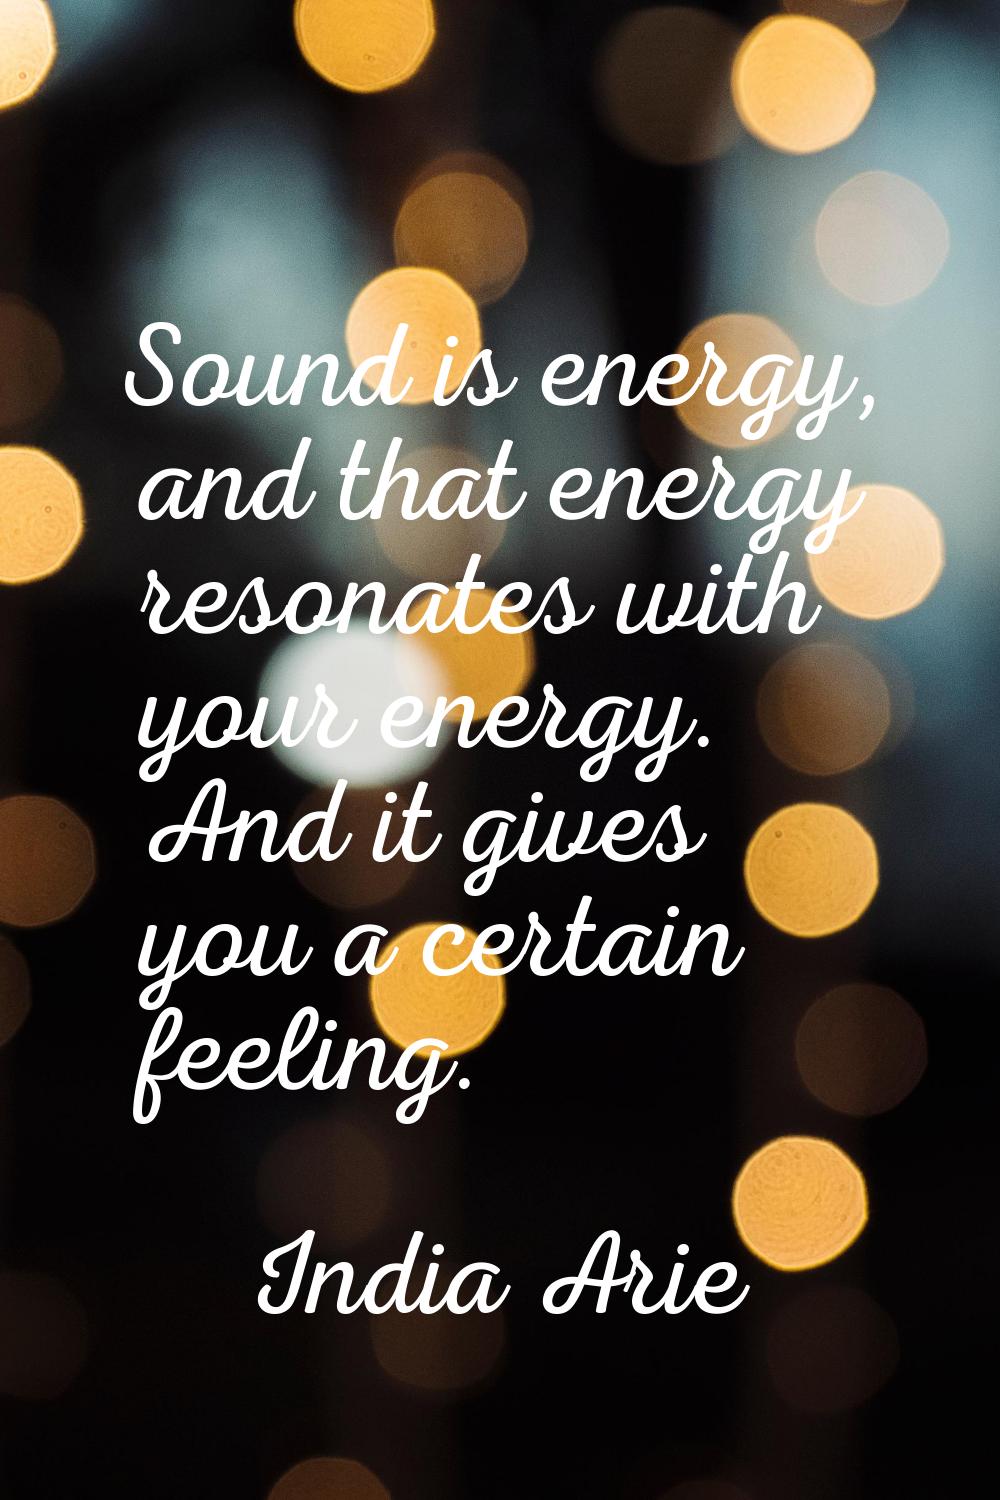 Sound is energy, and that energy resonates with your energy. And it gives you a certain feeling.